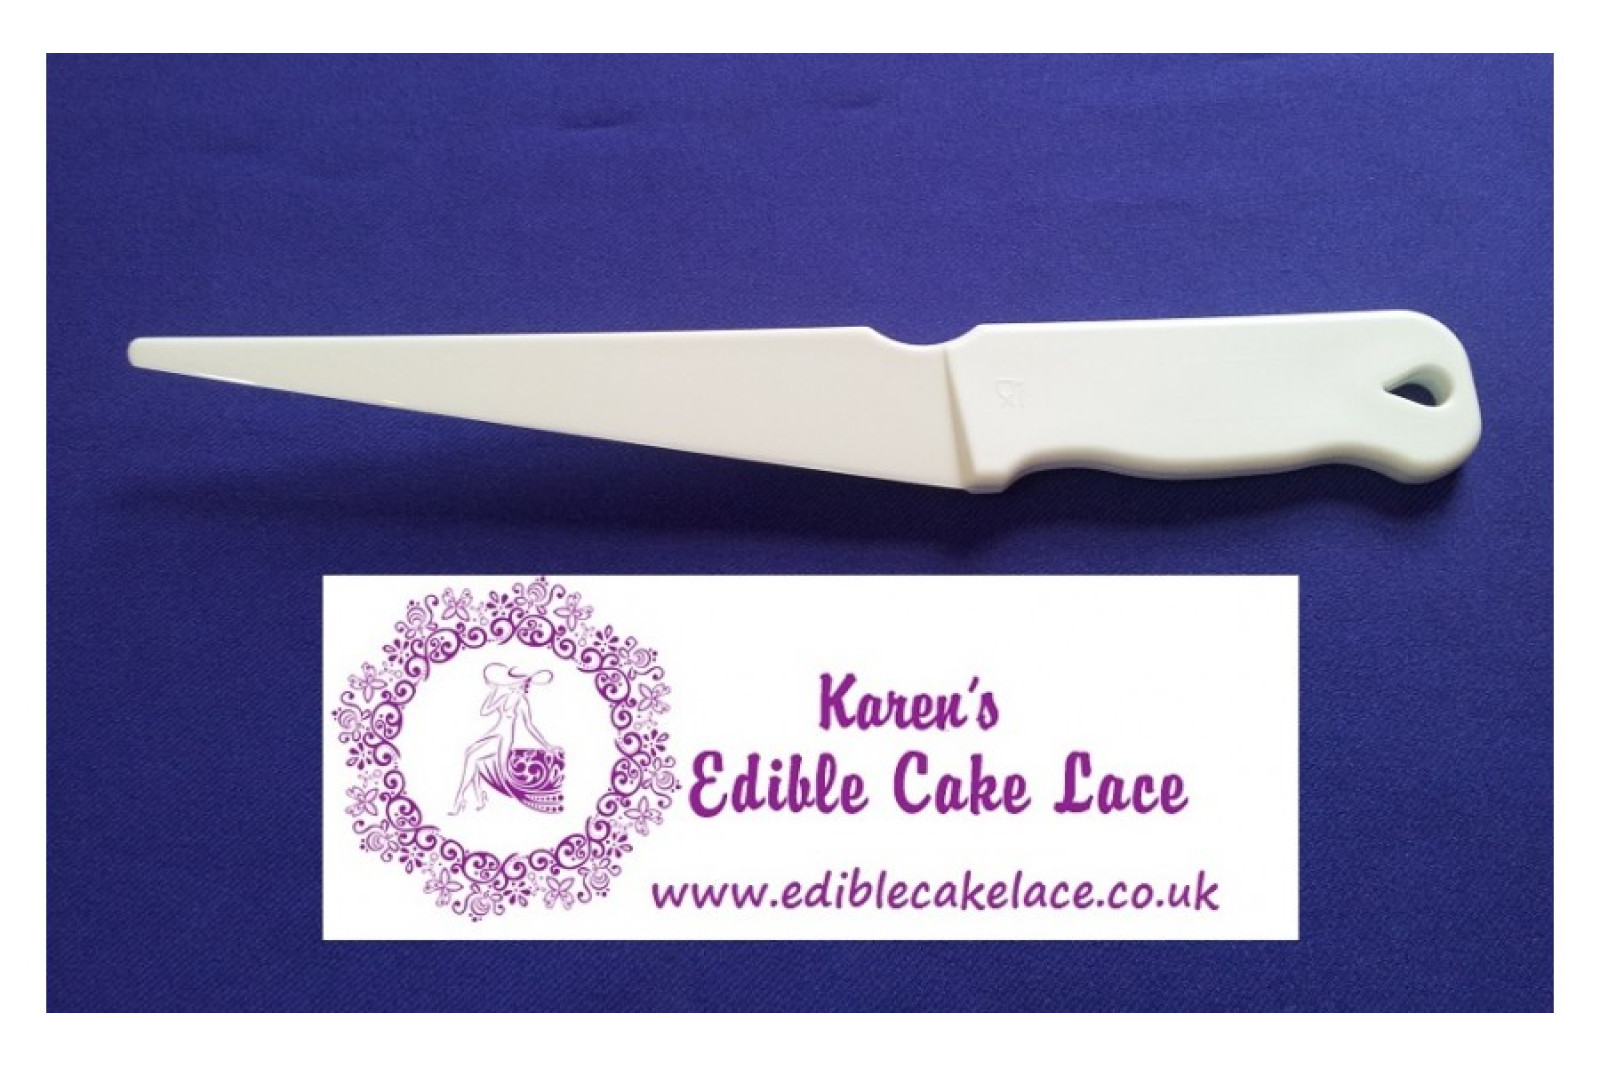 Spreading Knife | Cake Lace Mats for Edible Cake Lace Mixes and Premixes | Cake Decorating Craft Tool | Cake Makers Christmas Gifts Ideas